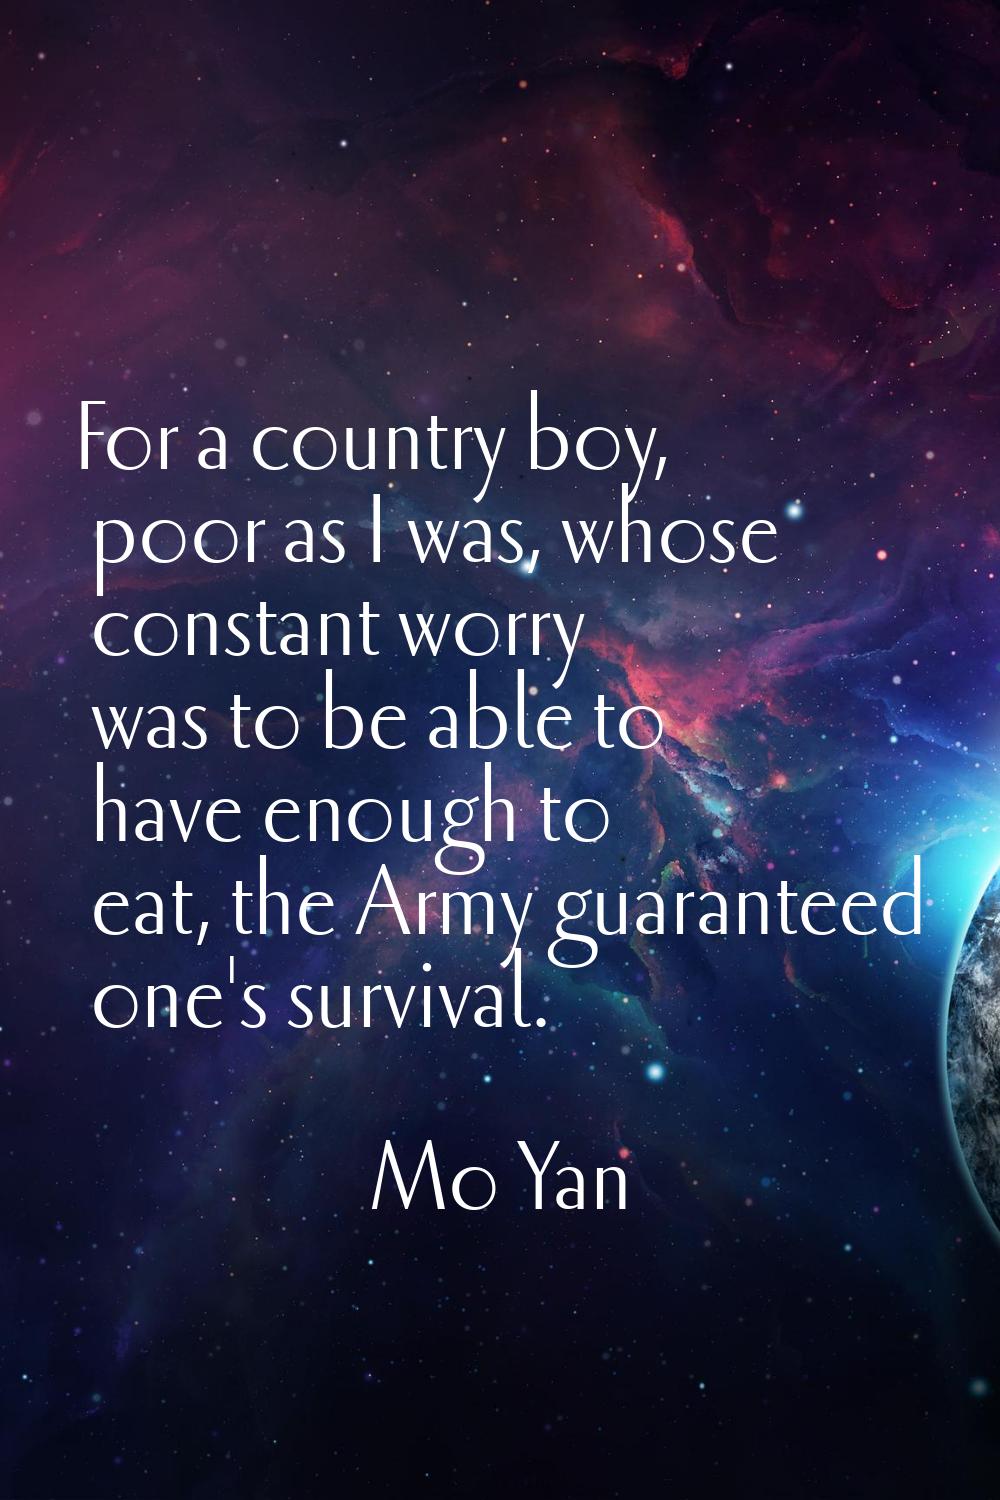 For a country boy, poor as I was, whose constant worry was to be able to have enough to eat, the Ar